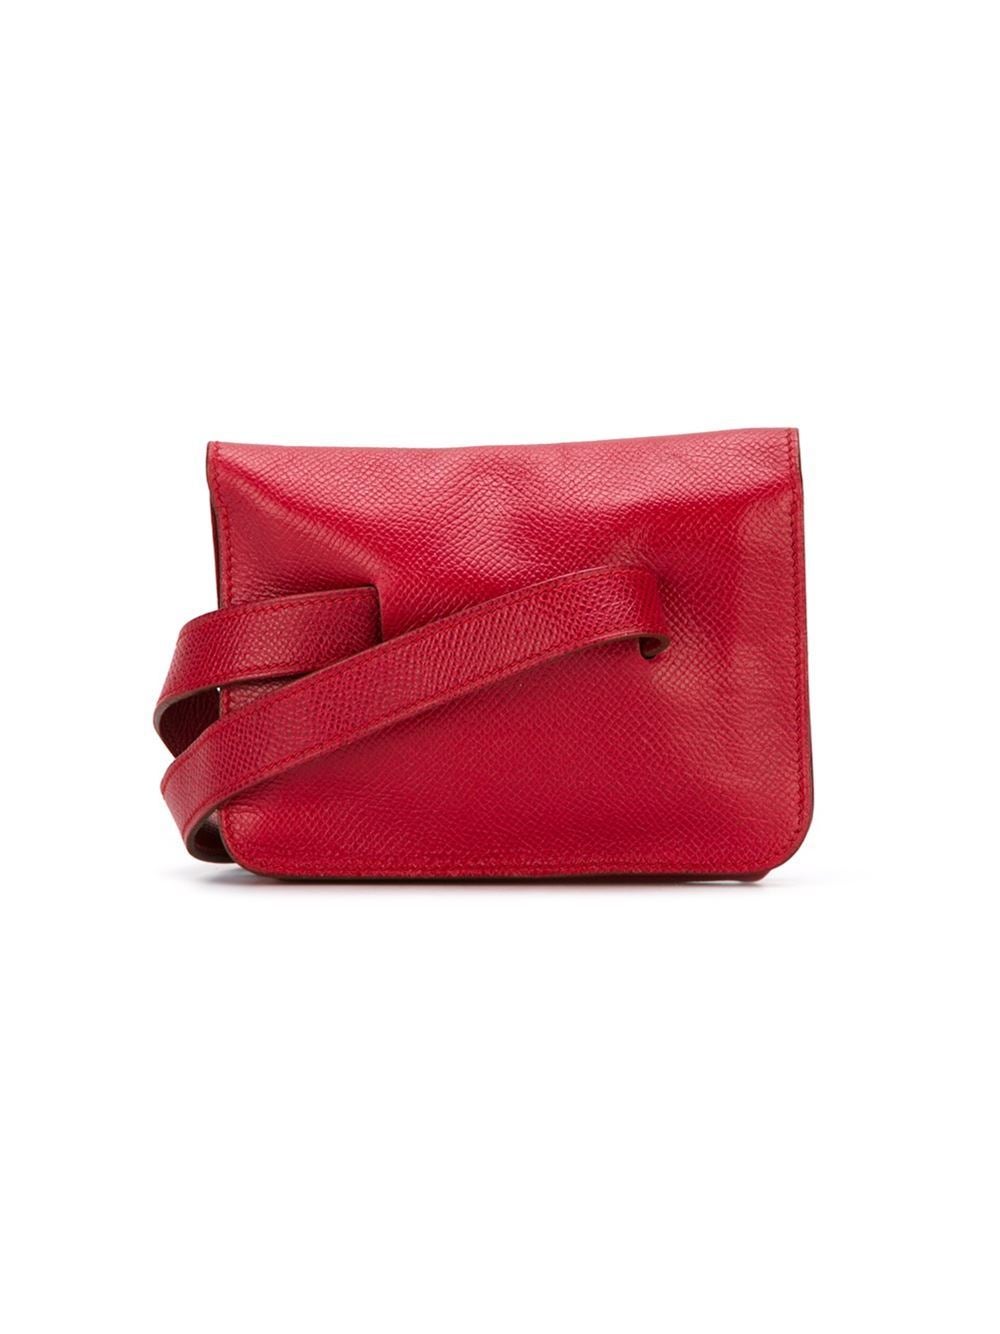 Super cute Hermes waist pouch in red epsom leather, front flap closure and press stud fastening. Excellent vintage condition. W: 14cm H: 11.5cm D: 3.5cm. Marked Hermès Paris. Letter U in a circle. 1991.